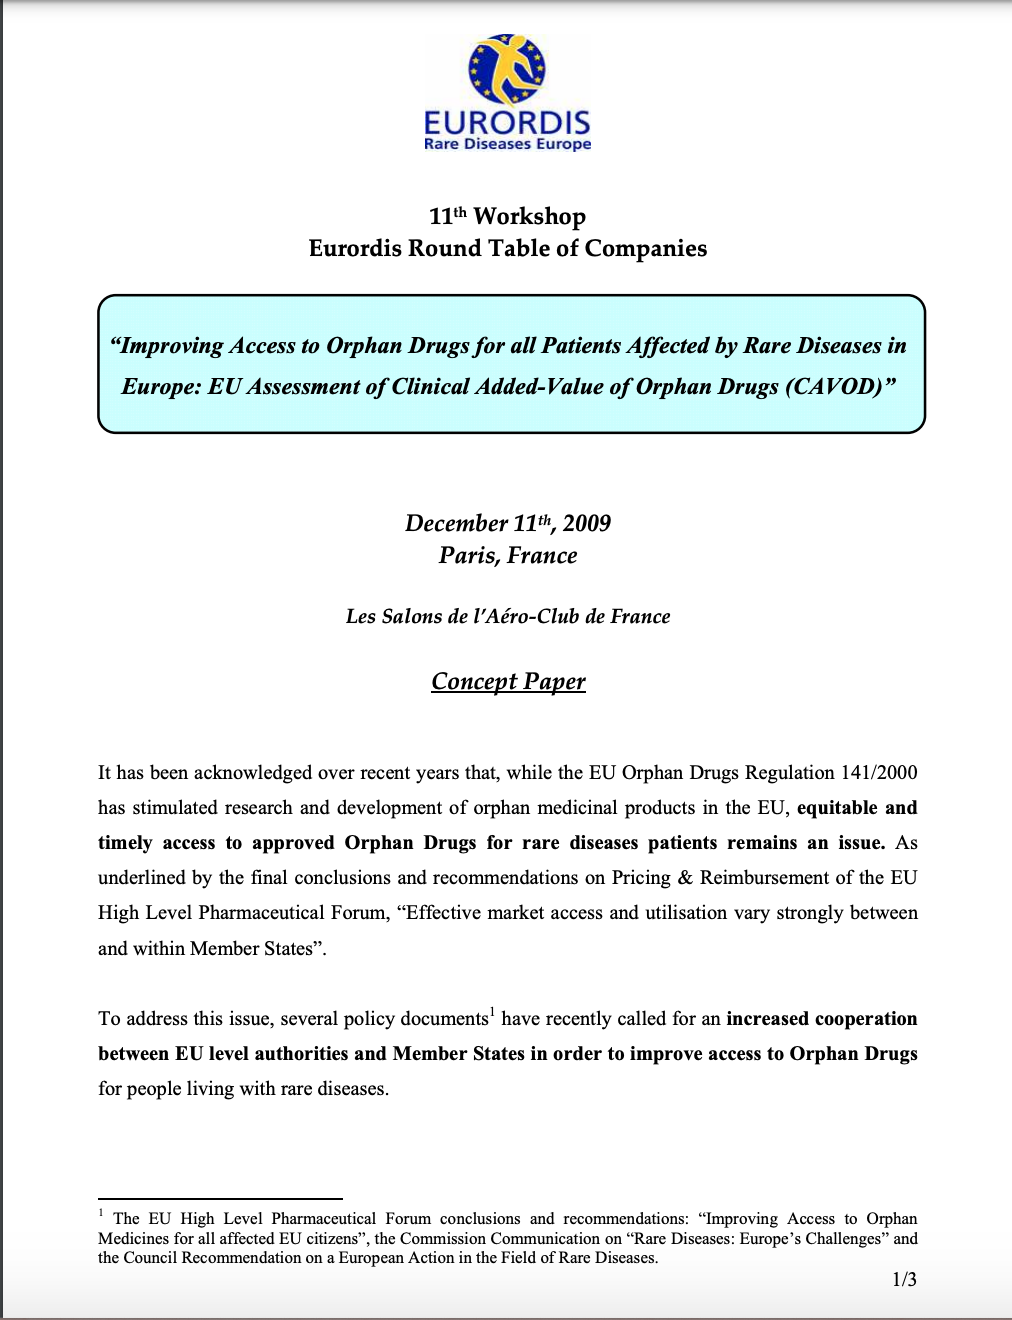 Concept paper: Improving Access to Orphan Drugs (11th ERTC Workshop)